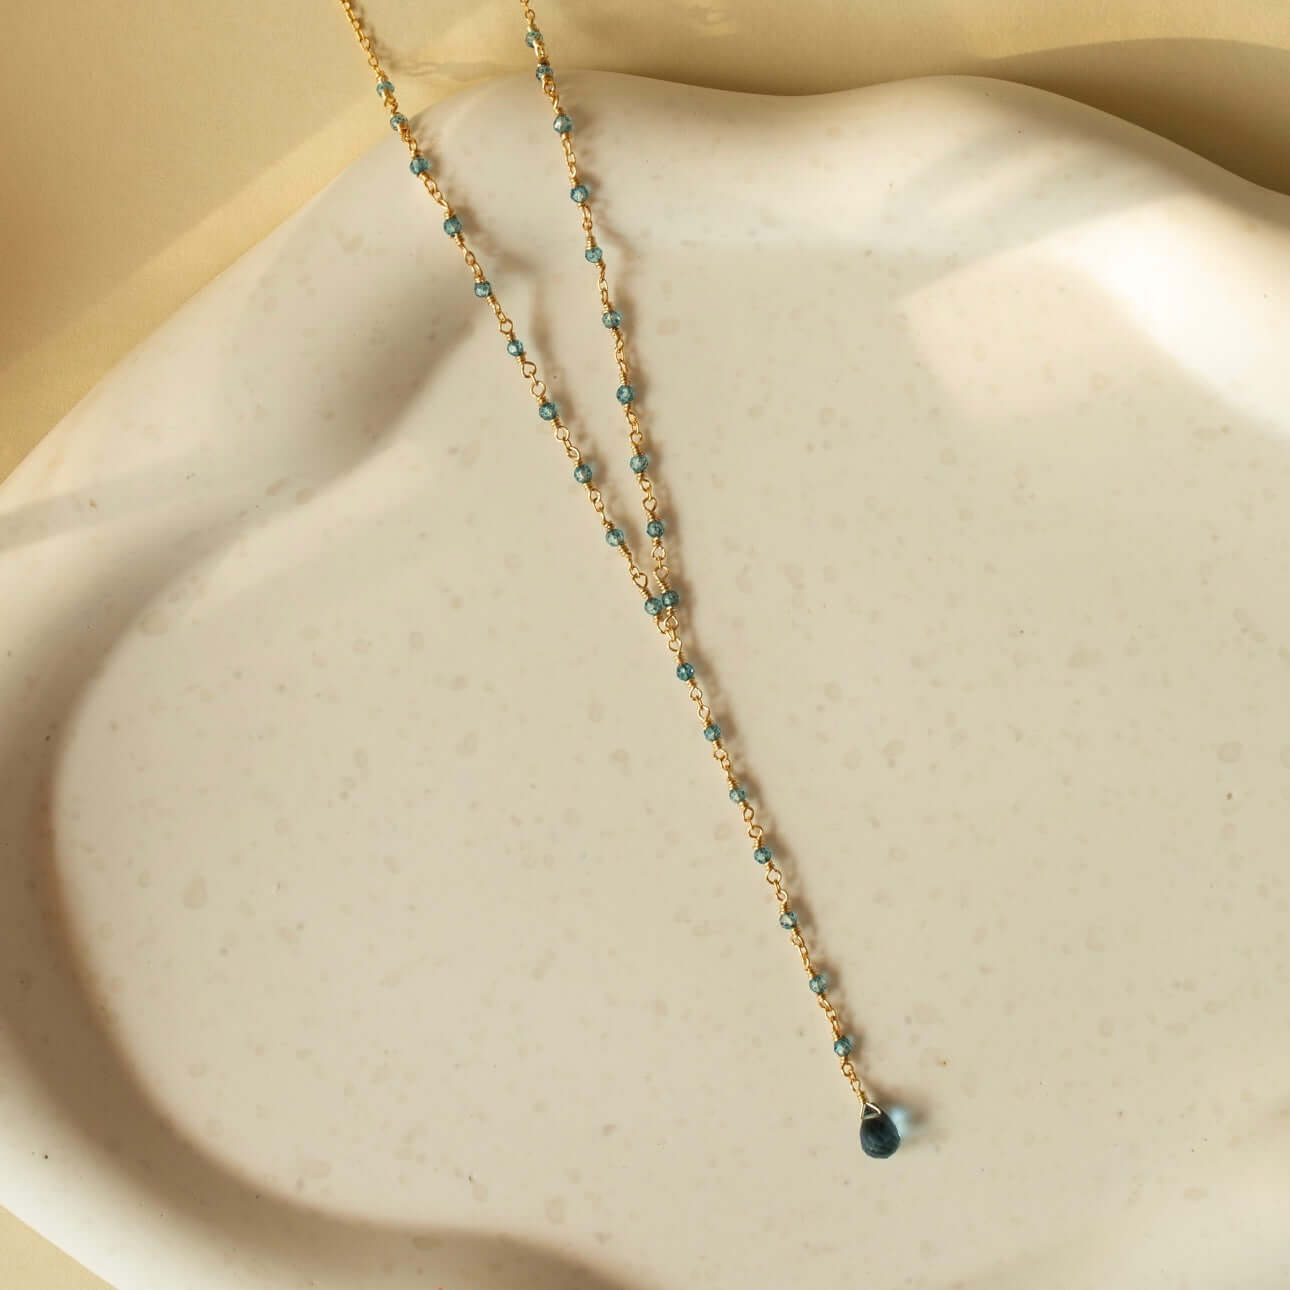 A lolite necklace resting on a clay plate—an easy and delightful display.